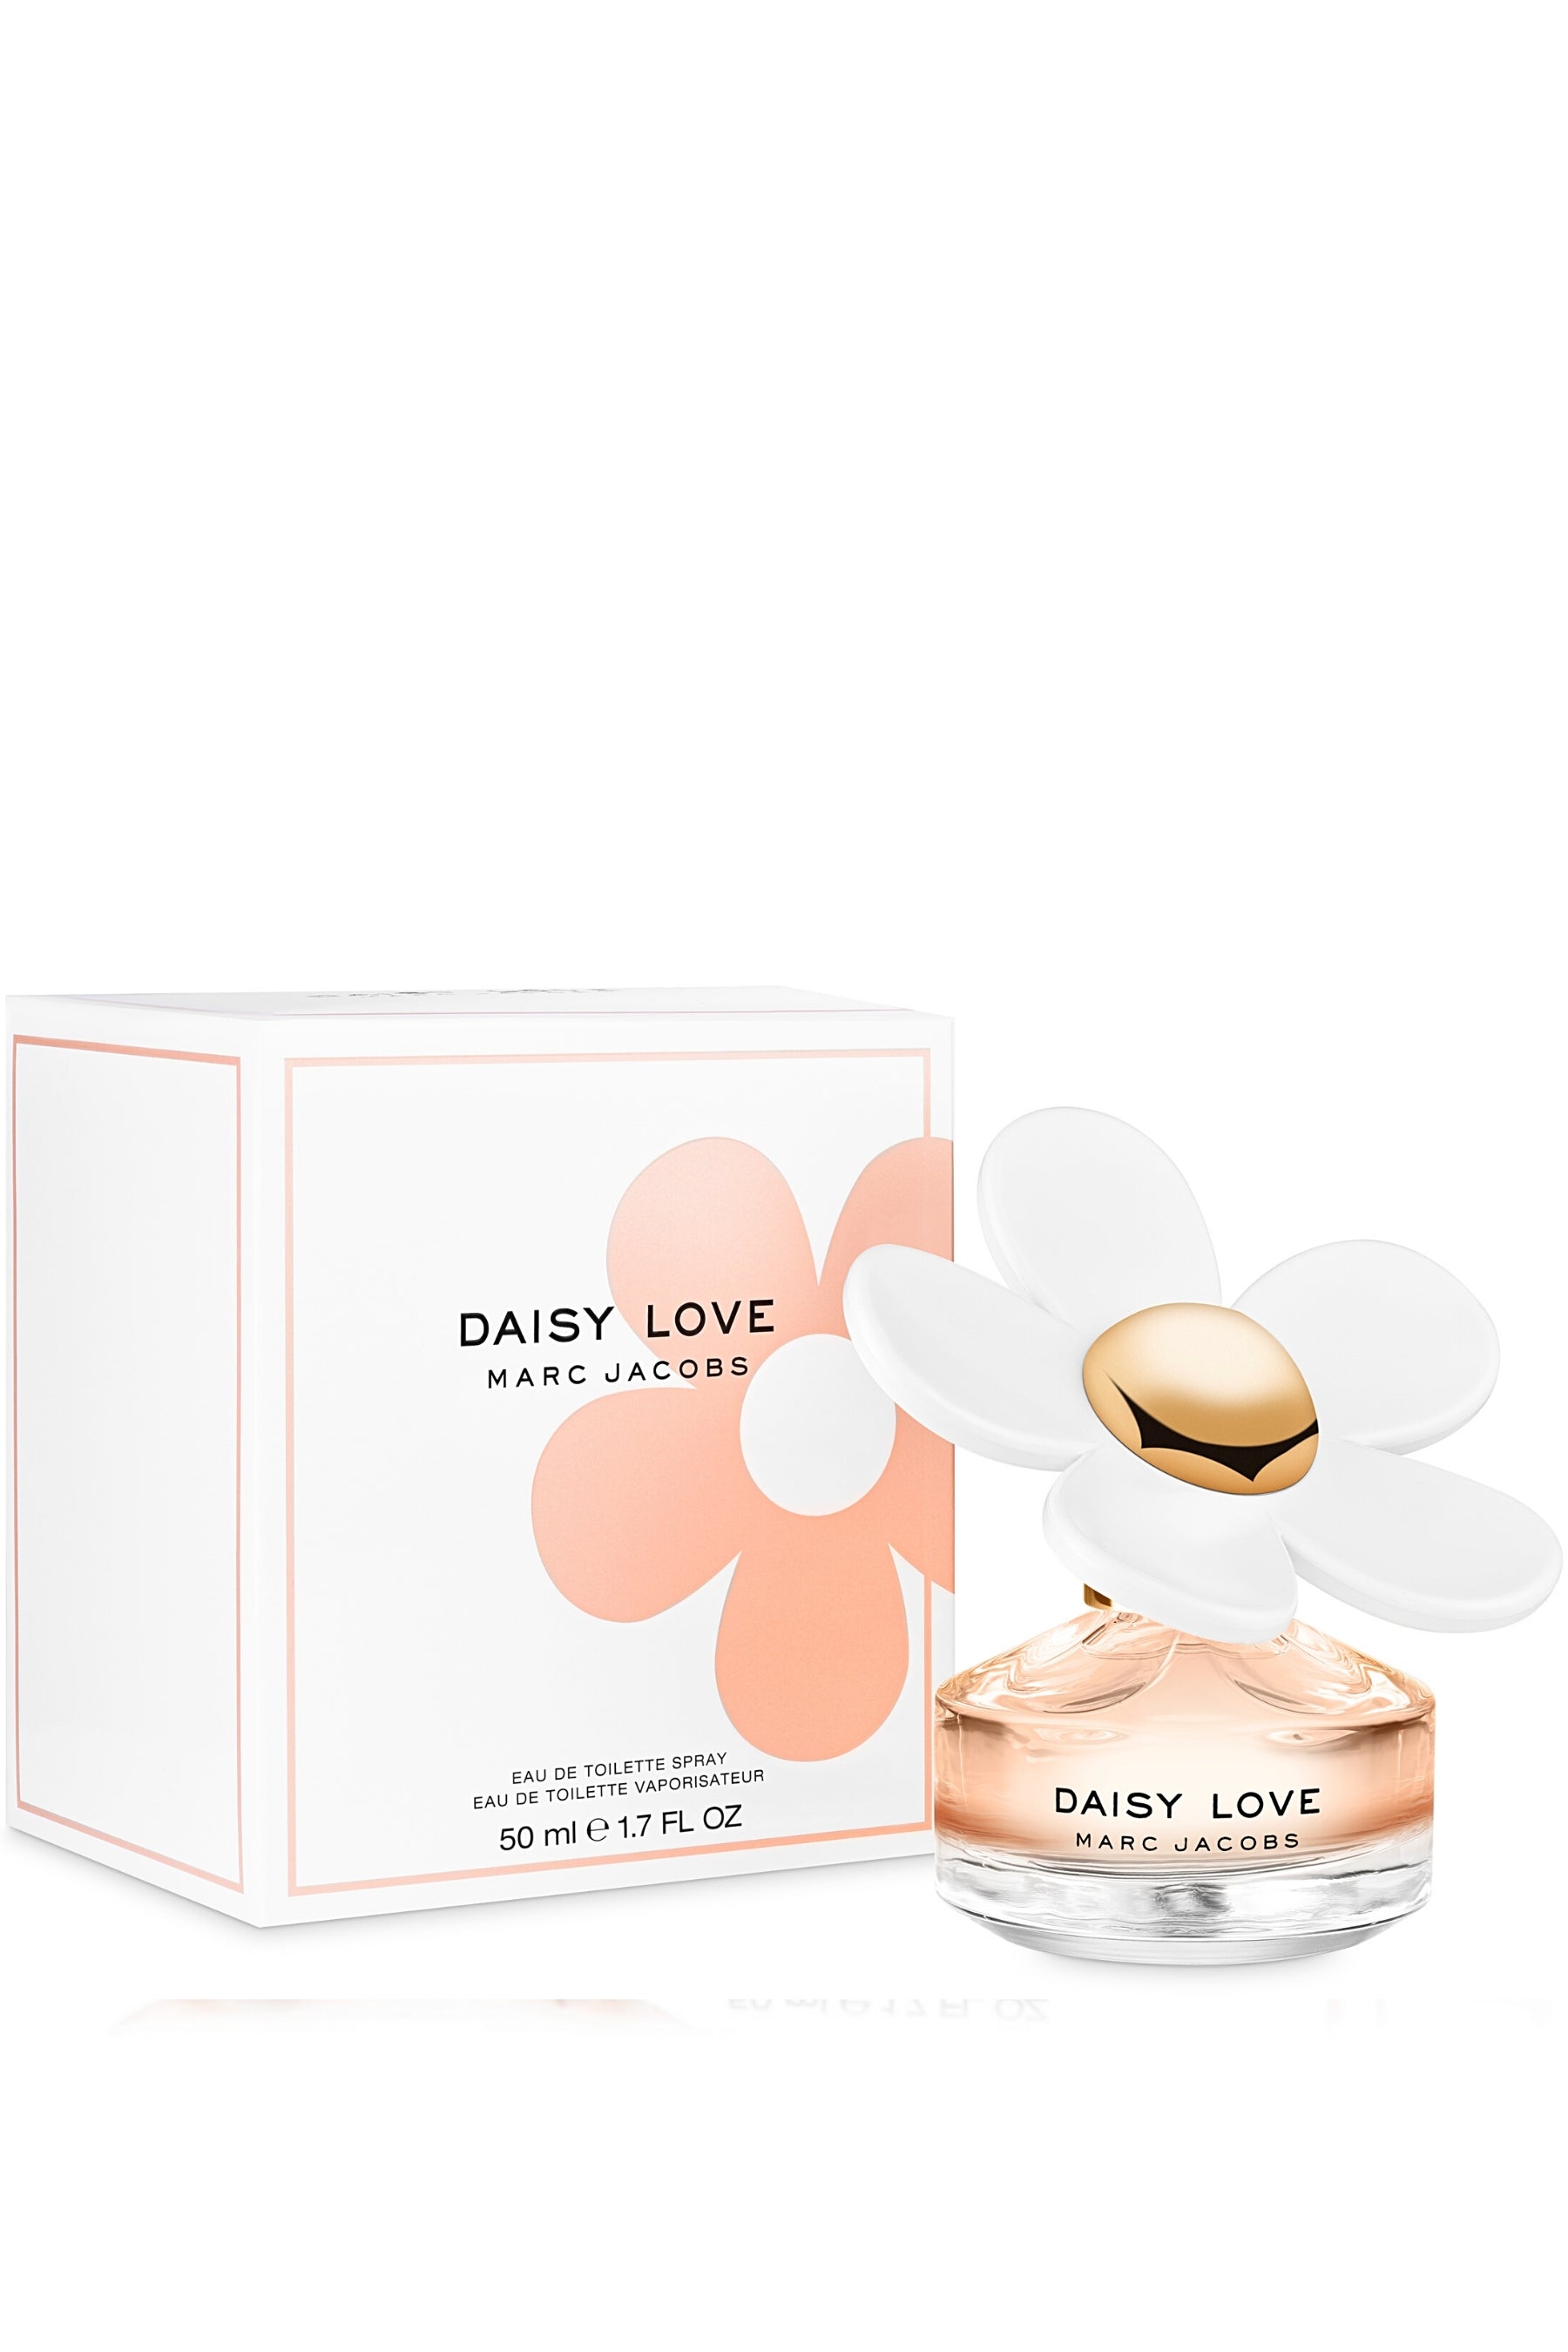 Marc Jacobs Daisy Love — Real Daisy Scent? 2023 Review